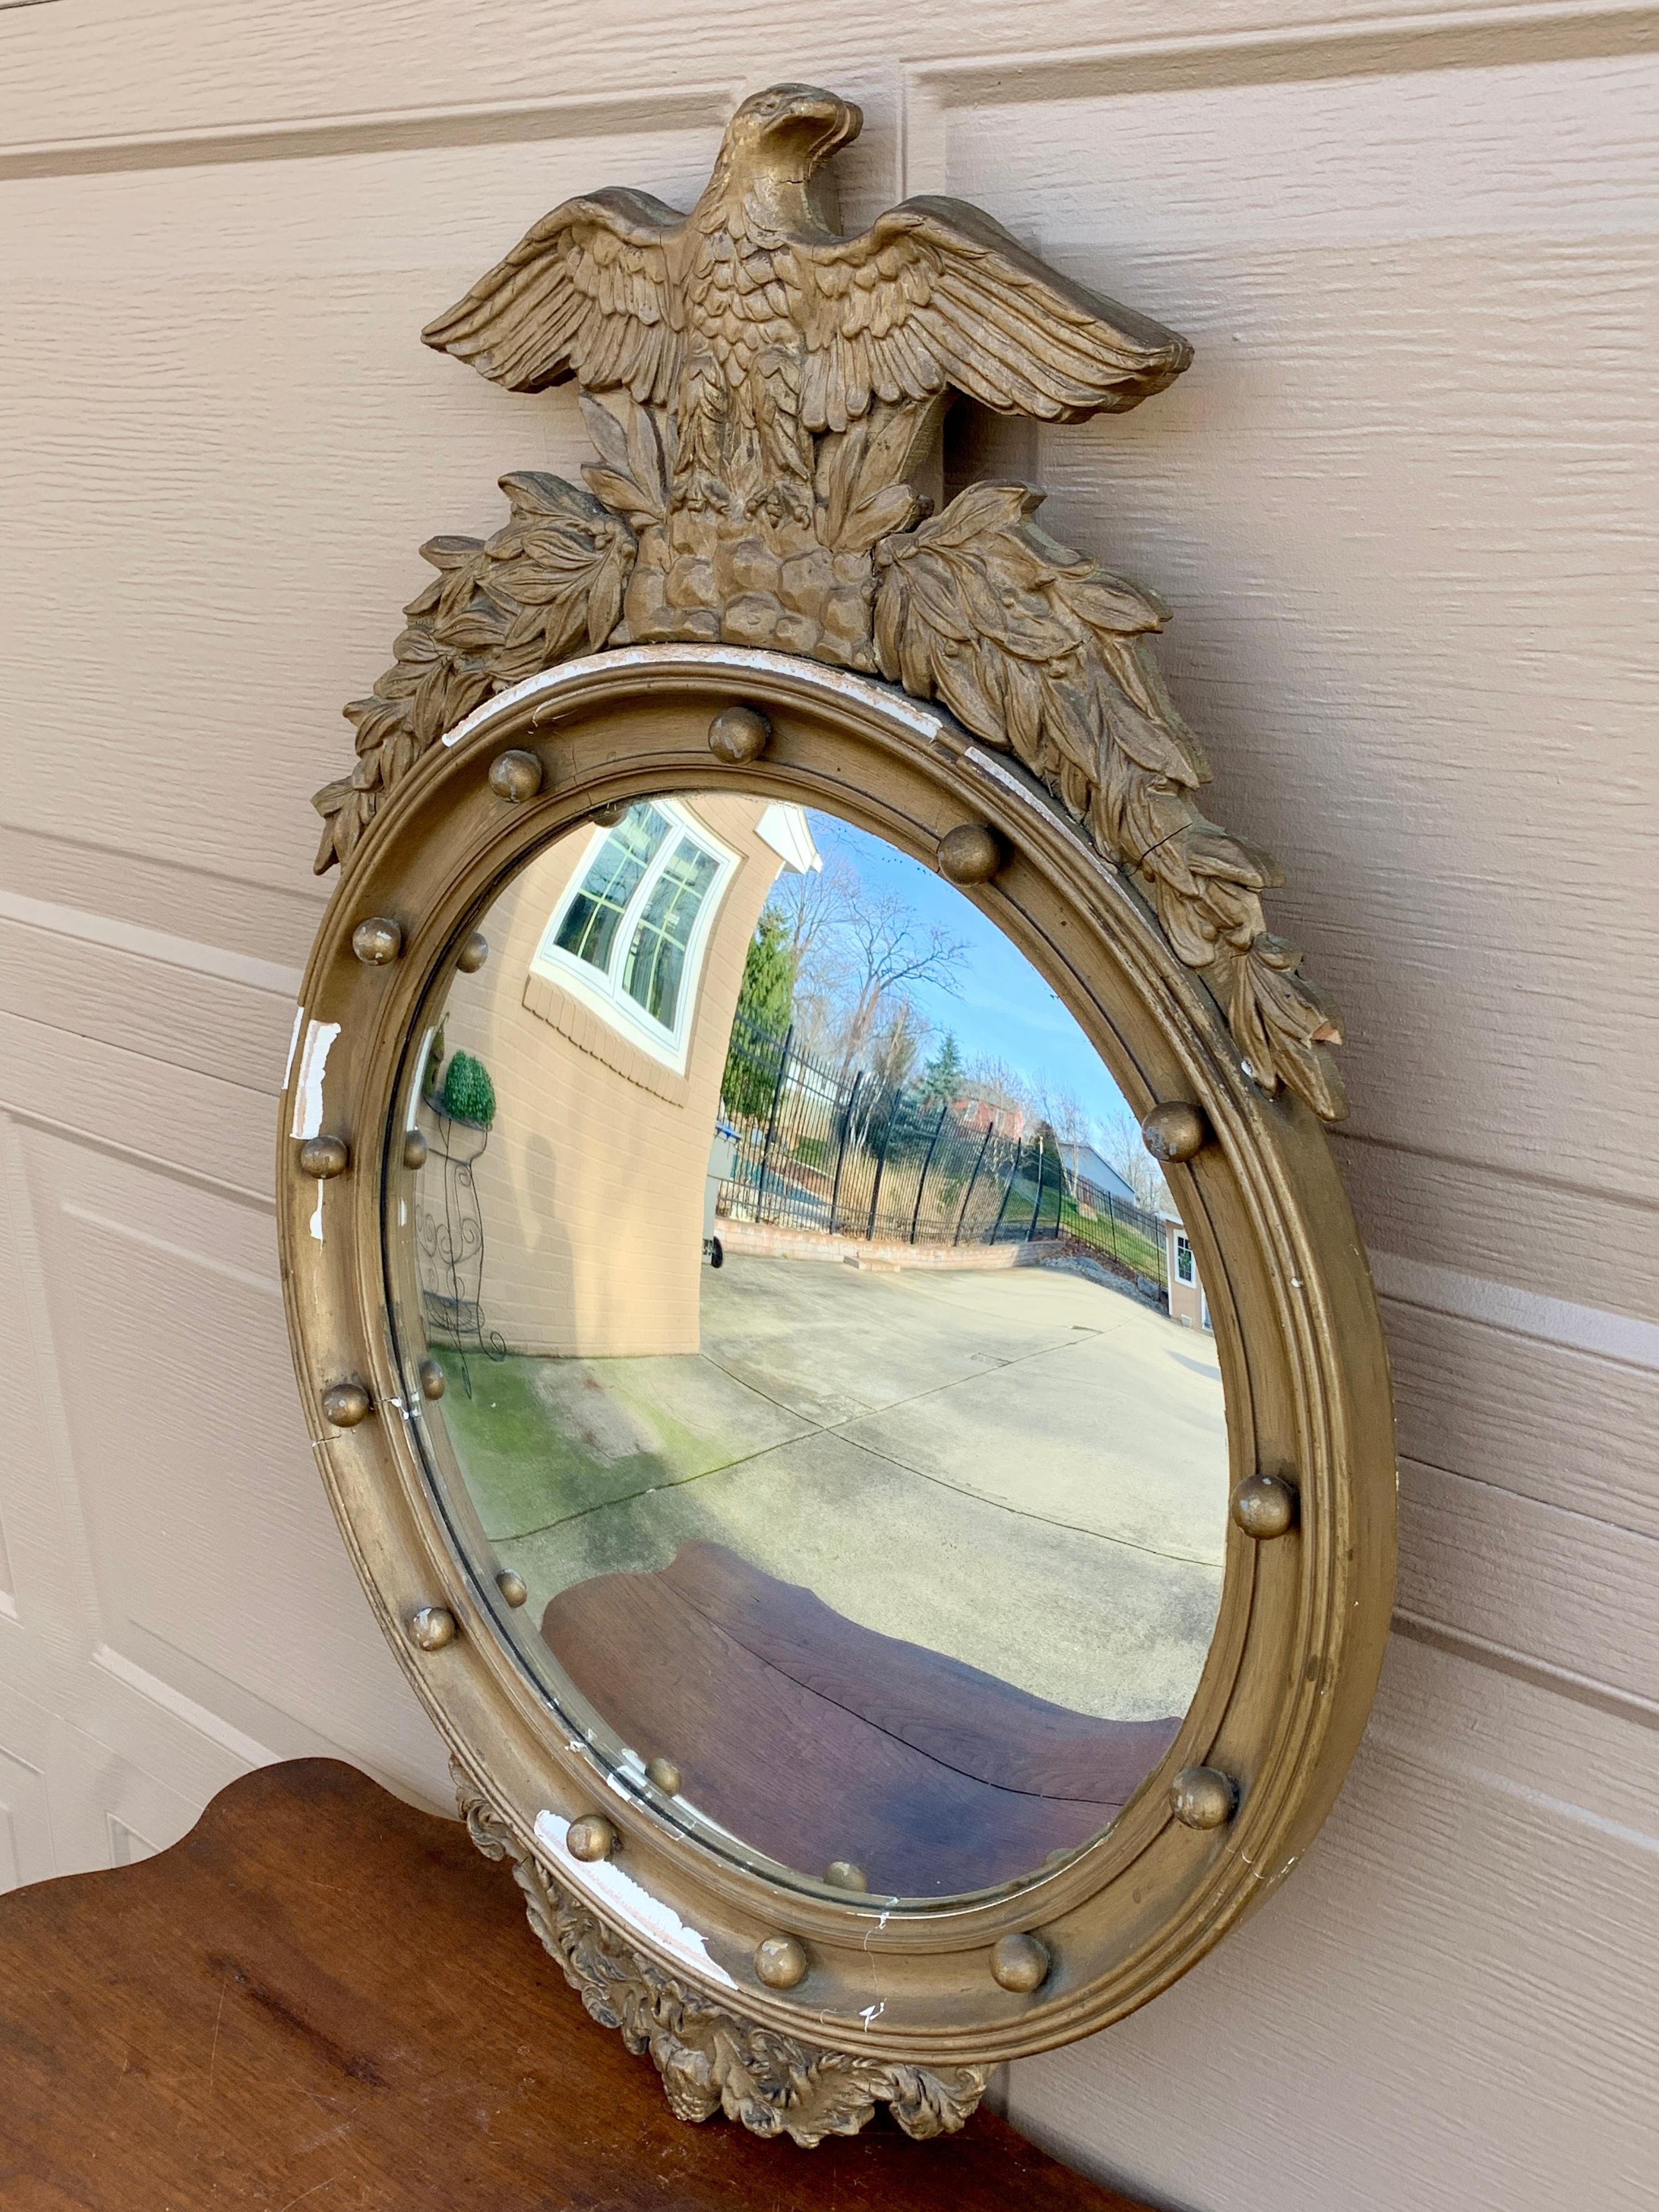 A gorgeous Federal or Regency style convex bullseye wall mirror featuring a carved eagle with open wings standing on olive branches and 13 small spheres representing the original 13 colonies around the inside perimeter.

USA, Mid 20th